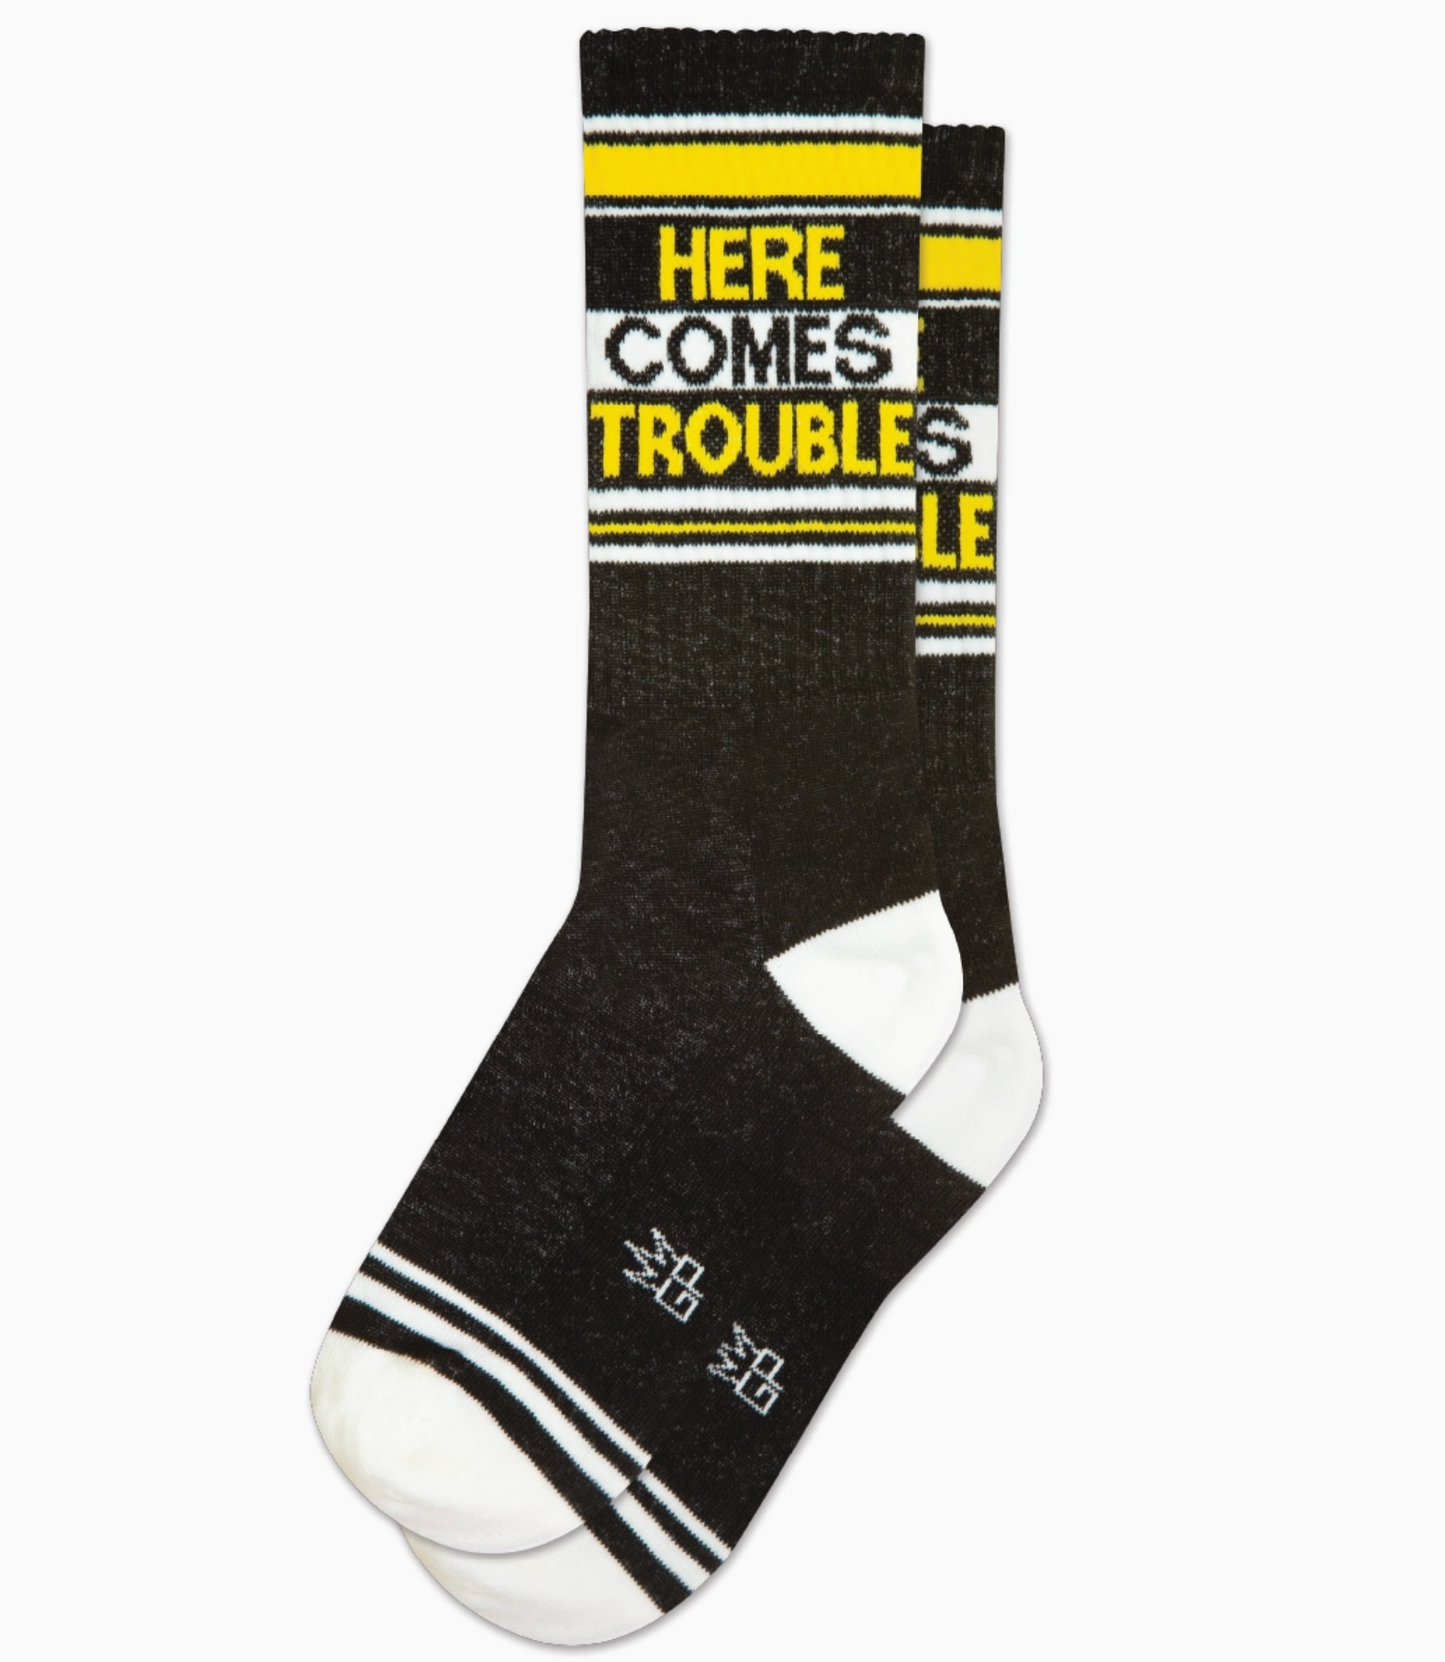 Here Comes Trouble Socks